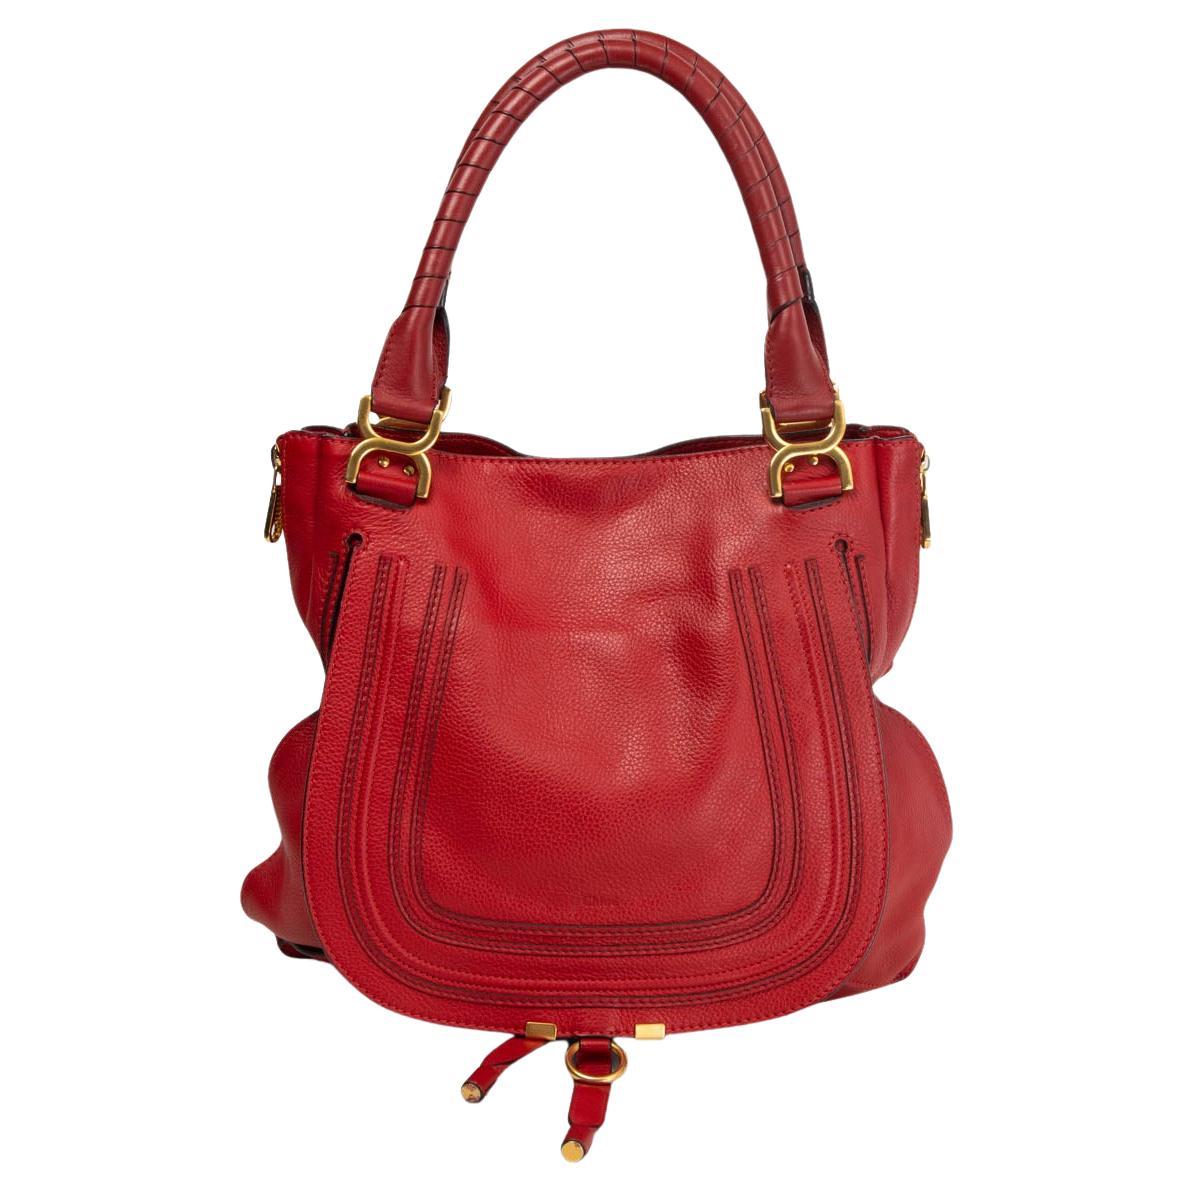 55670 auth HERMES Rouge Garance red leather VICTORIA II PORTE-DOCUMENTS Bag